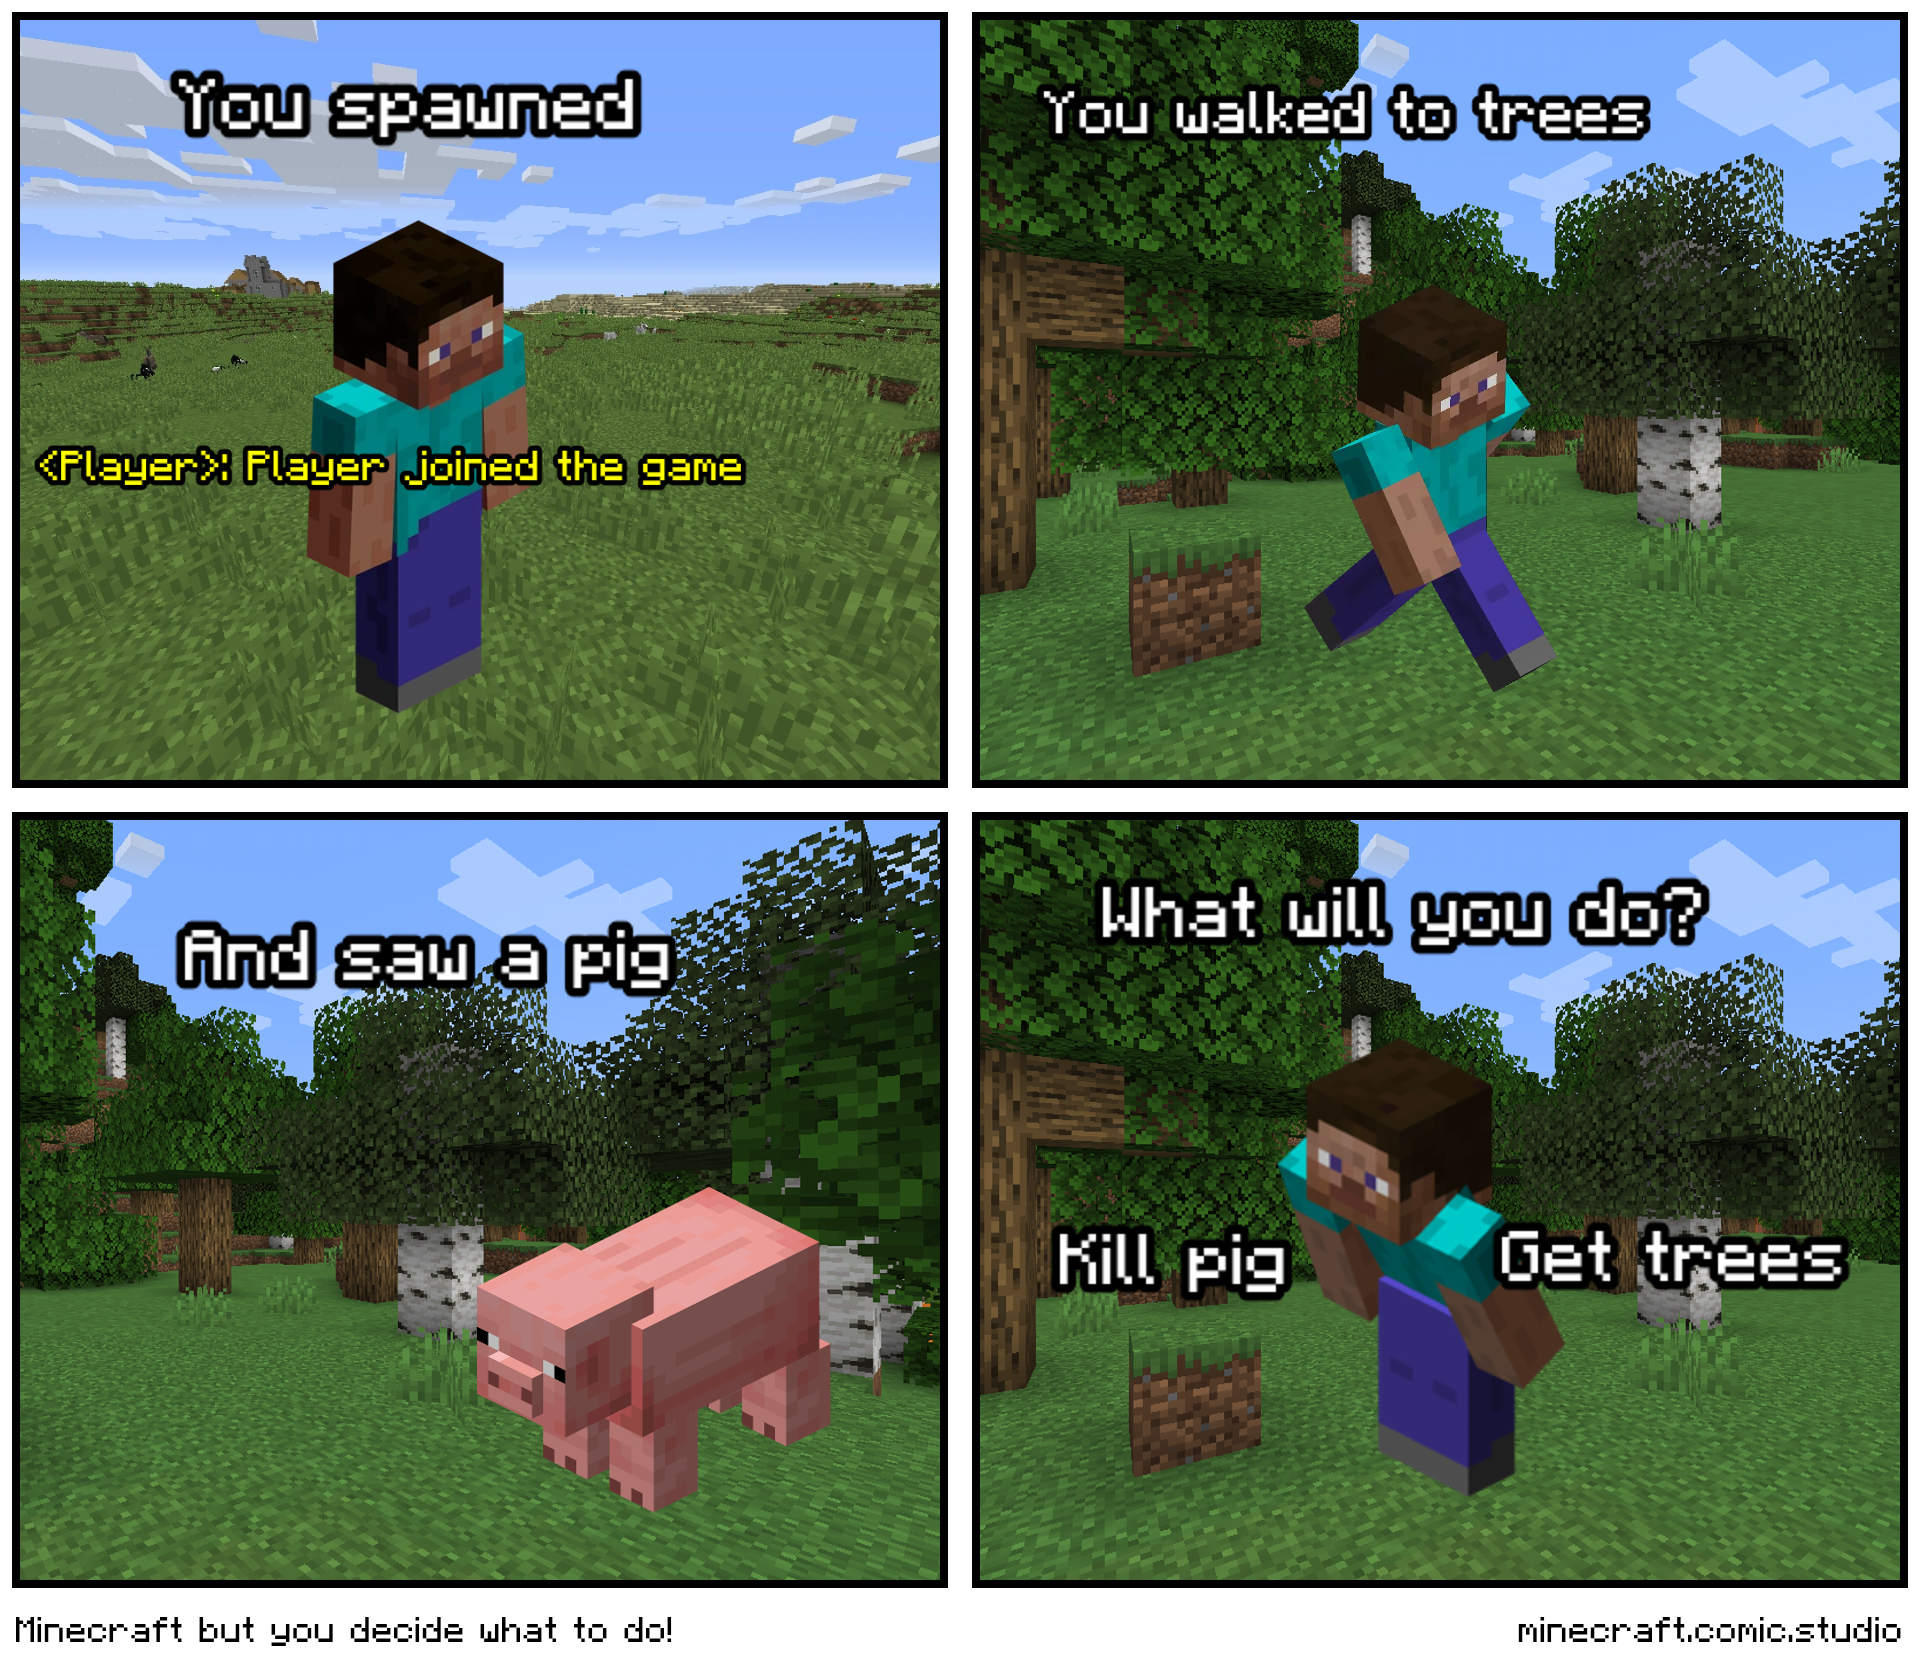 Minecraft but you decide what to do!